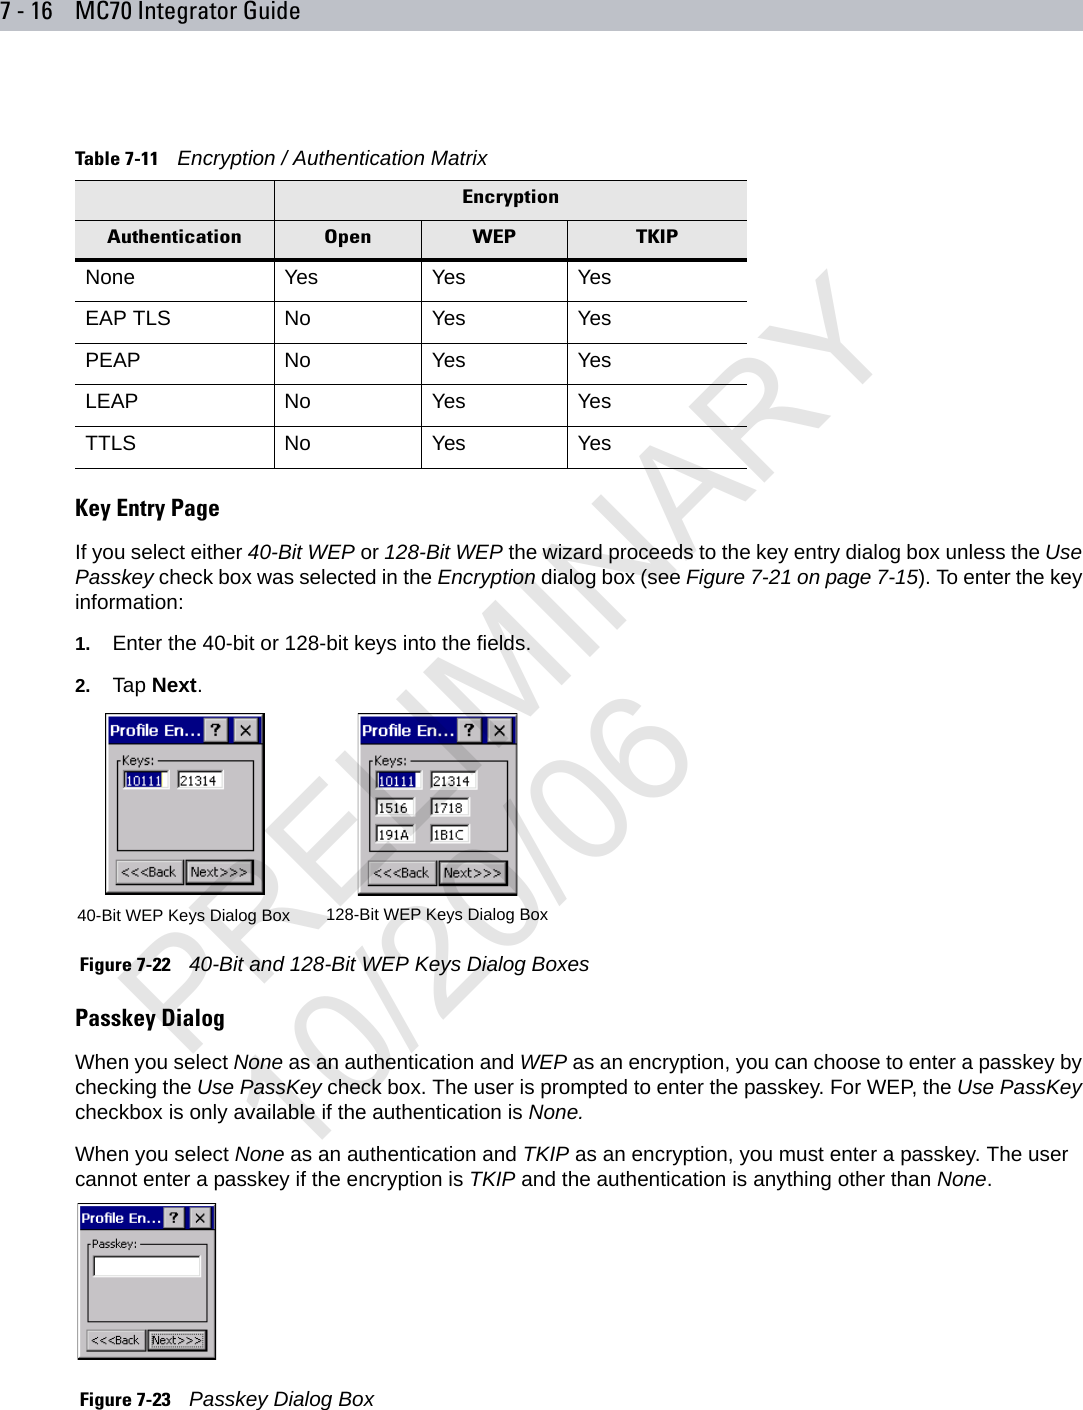 7 - 16 MC70 Integrator GuideKey Entry PageIf you select either 40-Bit WEP or 128-Bit WEP the wizard proceeds to the key entry dialog box unless the Use Passkey check box was selected in the Encryption dialog box (see Figure 7-21 on page 7-15). To enter the key information:1. Enter the 40-bit or 128-bit keys into the fields.2. Tap Next. Figure 7-22    40-Bit and 128-Bit WEP Keys Dialog BoxesPasskey DialogWhen you select None as an authentication and WEP as an encryption, you can choose to enter a passkey by checking the Use PassKey check box. The user is prompted to enter the passkey. For WEP, the Use PassKey checkbox is only available if the authentication is None.When you select None as an authentication and TKIP as an encryption, you must enter a passkey. The user cannot enter a passkey if the encryption is TKIP and the authentication is anything other than None. Figure 7-23    Passkey Dialog BoxTable 7-11    Encryption / Authentication MatrixEncryptionAuthentication Open WEP TKIPNone Yes Yes YesEAP TLS No Yes YesPEAP No Yes YesLEAP No Yes YesTTLS No Yes Yes40-Bit WEP Keys Dialog Box 128-Bit WEP Keys Dialog BoxPRELIMINARY10/20/06